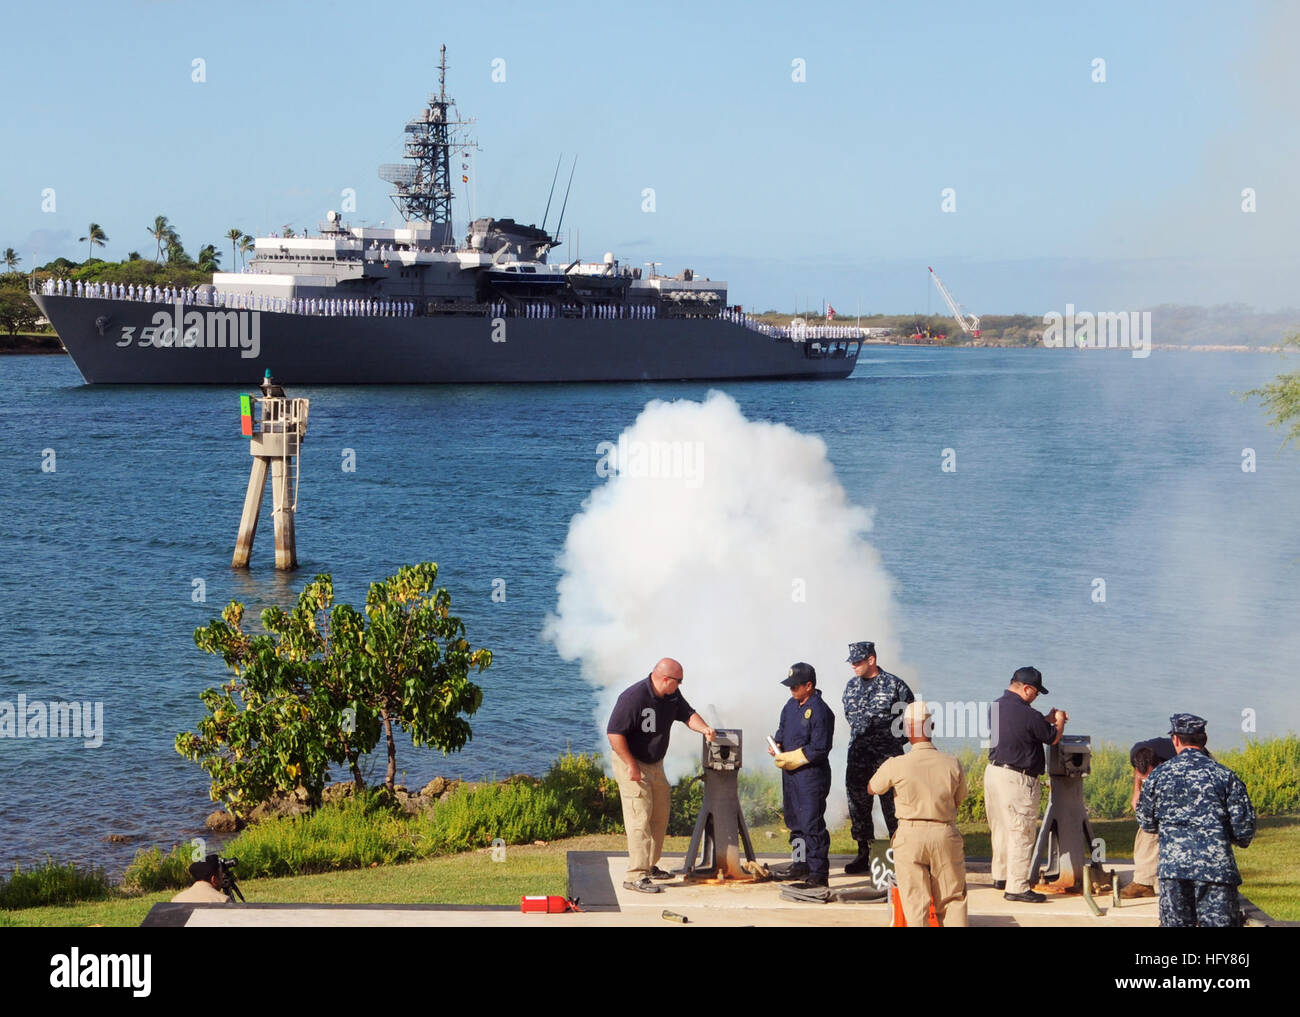 100608-N-0464S-005 PEARL HARBOR (June 8, 2010) Members of Lockheed Martin and Joint Base Pearl Harbor-Hickam Security Department perform a 21-gun salute for the arrival of the Japan Maritime Self-Defense Force training squadron ship JS Kashima (TV 3508) for a port visit. This year marks the 50th anniversary of the U.S. and Japan Treaty of Mutual Cooperation of Security that in 1960 established the alliance between the two countries. (U.S. Navy photo by Seaman Rachel Swiatnicki/Released) US Navy 100608-N-0464S-005 Members of Lockheed Martin and Joint Base Pearl Harbor-Hickam Security Department Stock Photo